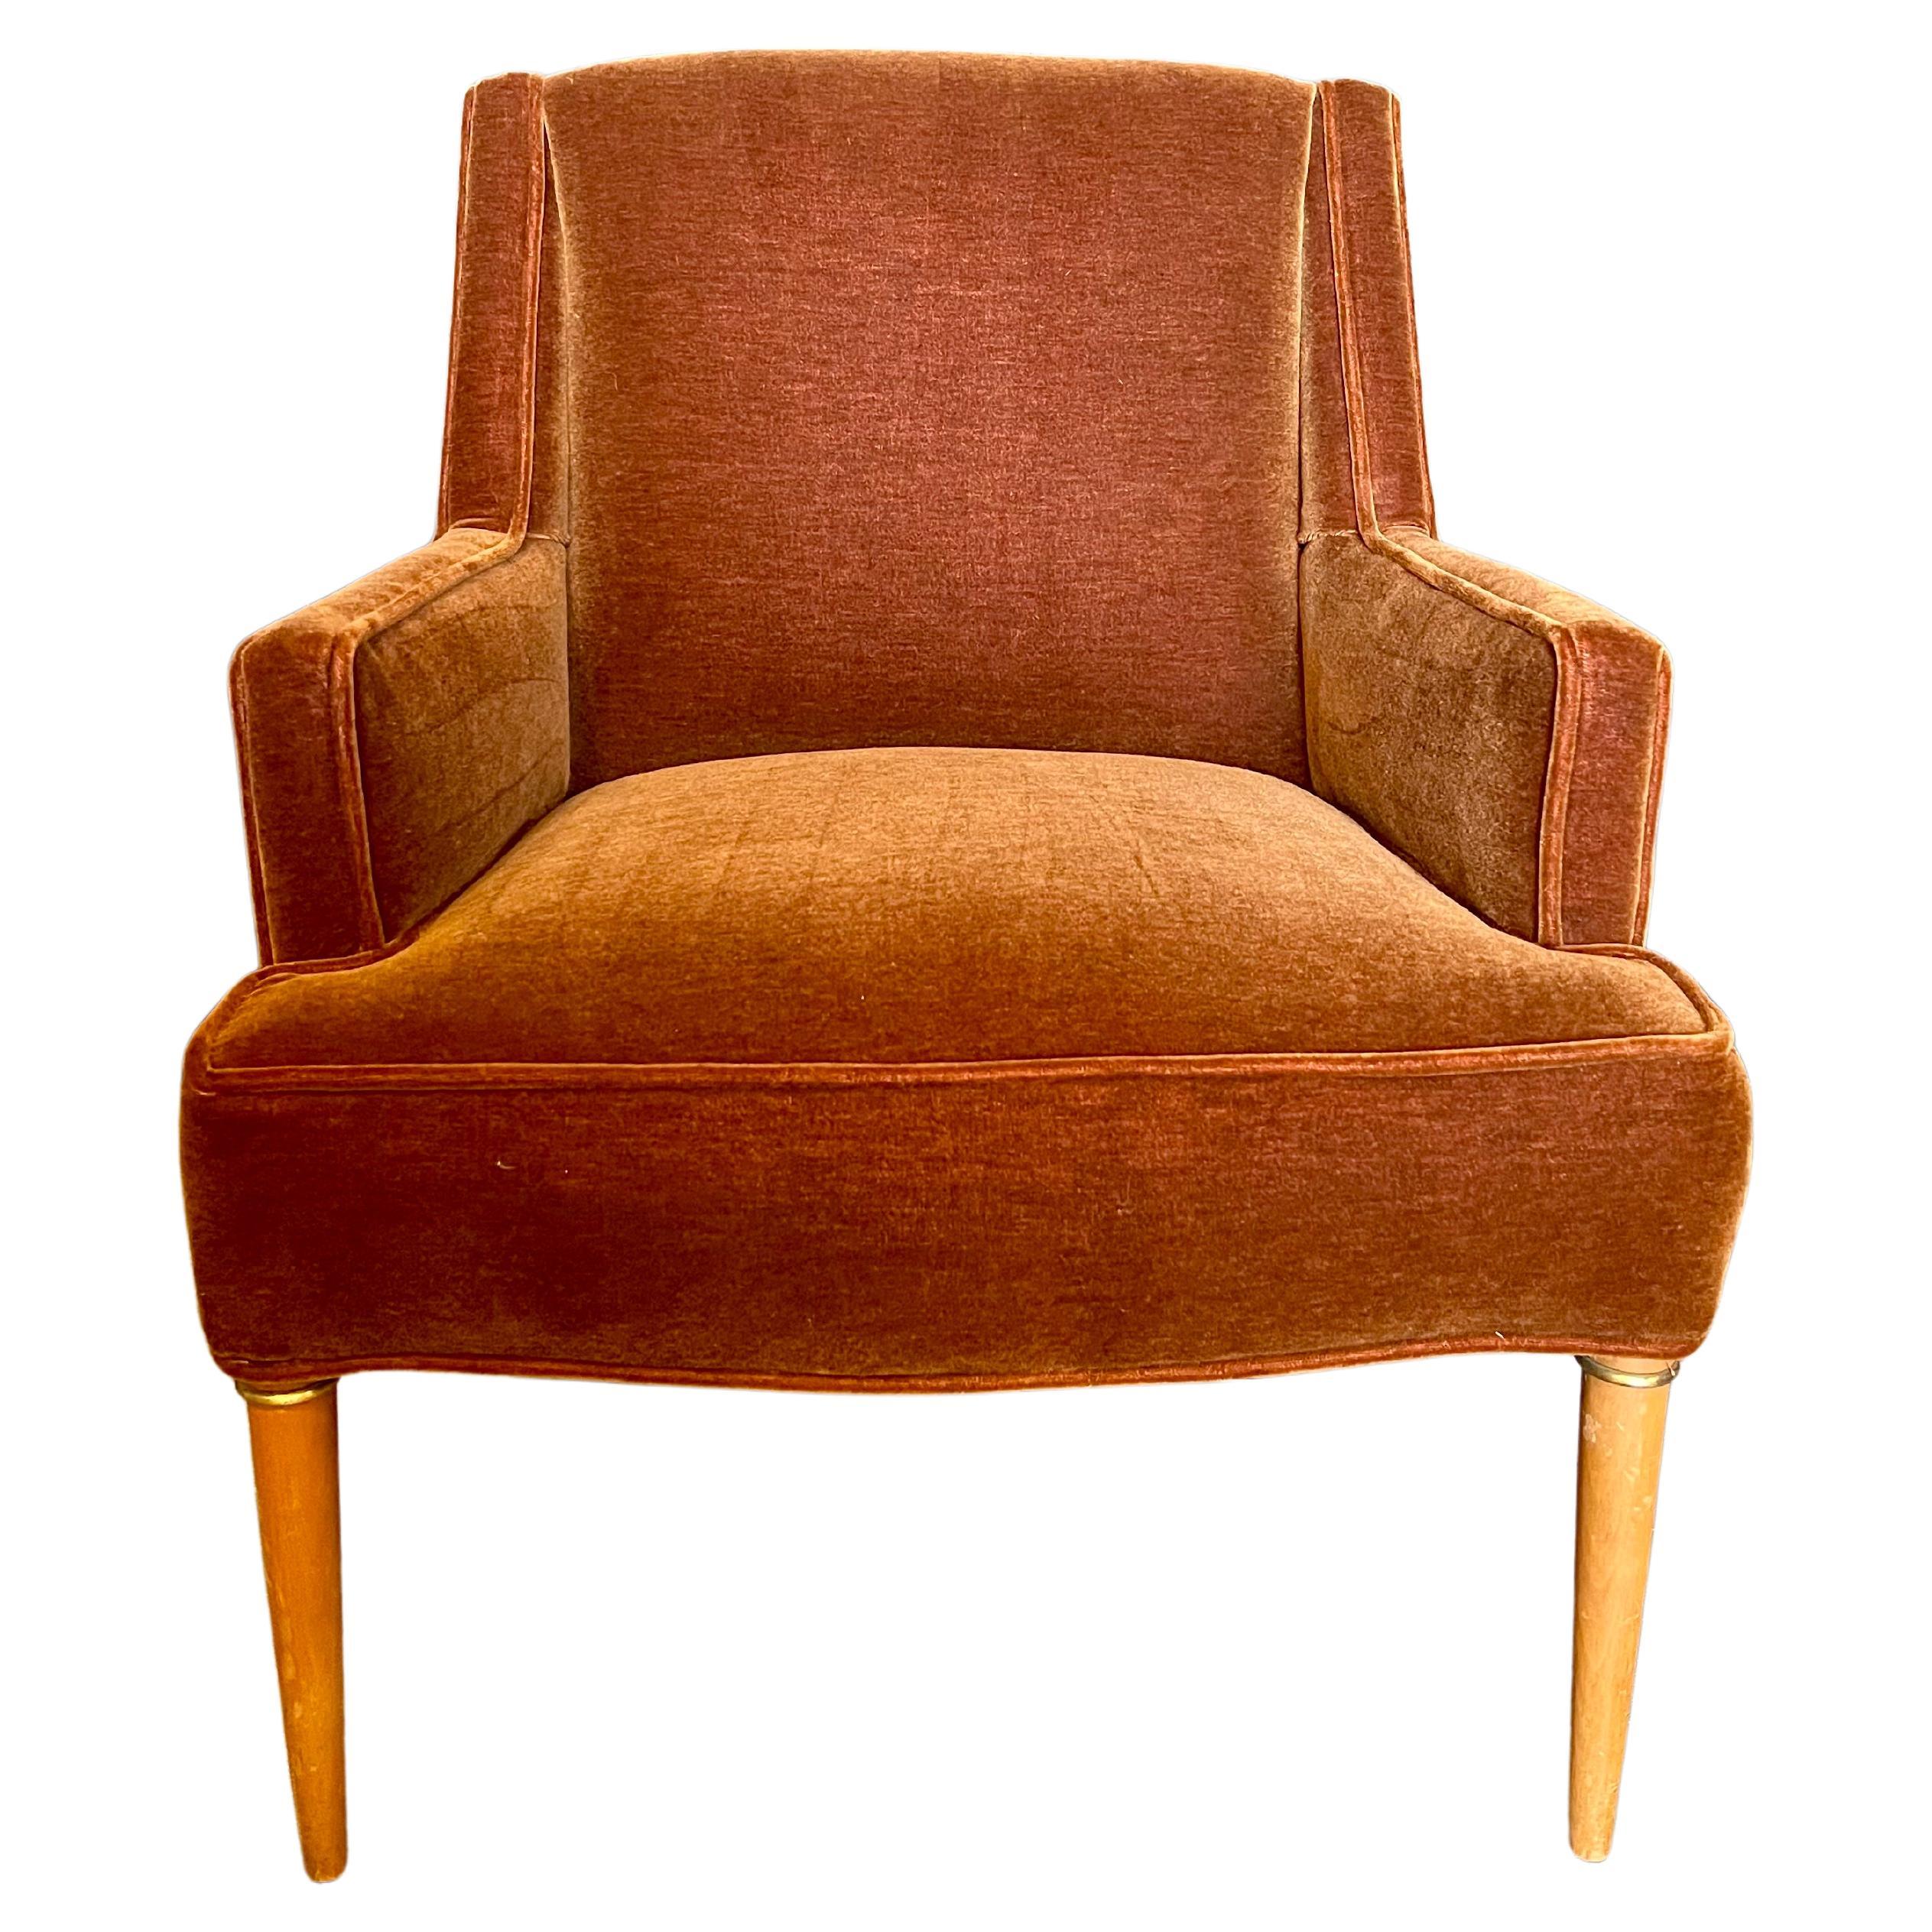 Mohair Mid-Century Accent Chair, in Rich Rust Colored Newly Upholstered Mohair For Sale